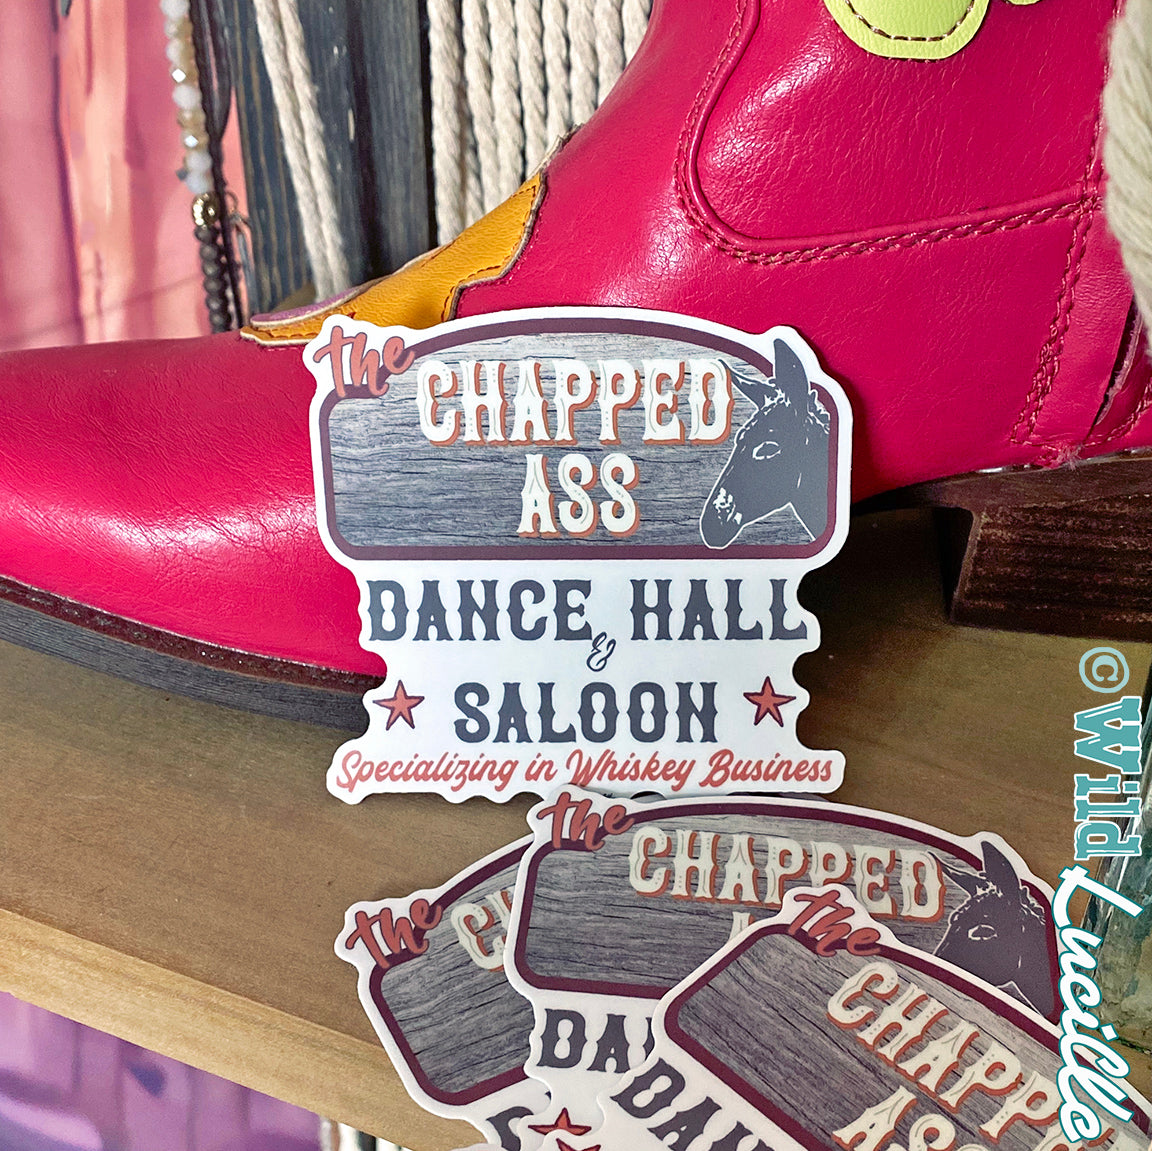 Chapped Ass Saloon Whiskey Business - Vinyl Sticker Decals